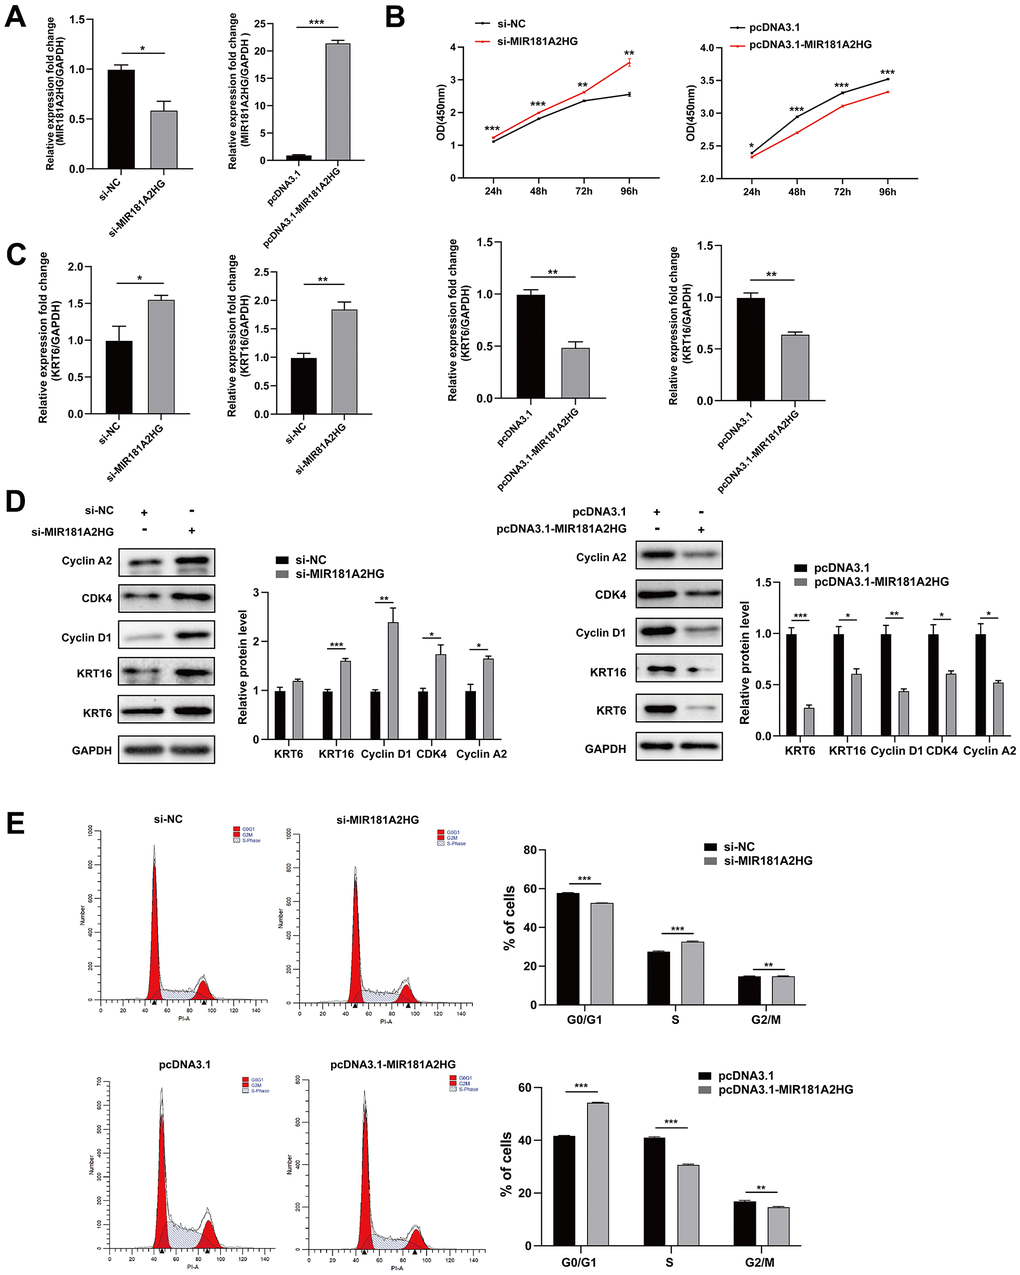 MIR181A2HG negatively regulated keratinocytes proliferation. (A) The efficiency of interference and overexpression of MIR181A2HG in HaCaT keratinocytes was detected. (B) The effects of interference or overexpression of MIR181A2HG on cell viability were assessed using CCK-8 kit. (C) HaCaT keratinocytes transfected for 48 hours were harvested and qRT-PCR was used to evaluate the effects of interference or overexpression of MIR181A2HG on KRT6 and KRT16 mRNA level. (D) Western blotting was applied to detect the effects on Cyclin A2, CDK4, Cyclin D1, KRT6 and KRT16 protein level. GAPDH served as an internal reference. (E) Flow cytometry was performed to analyze the effects on cell cycle distribution. *PPP